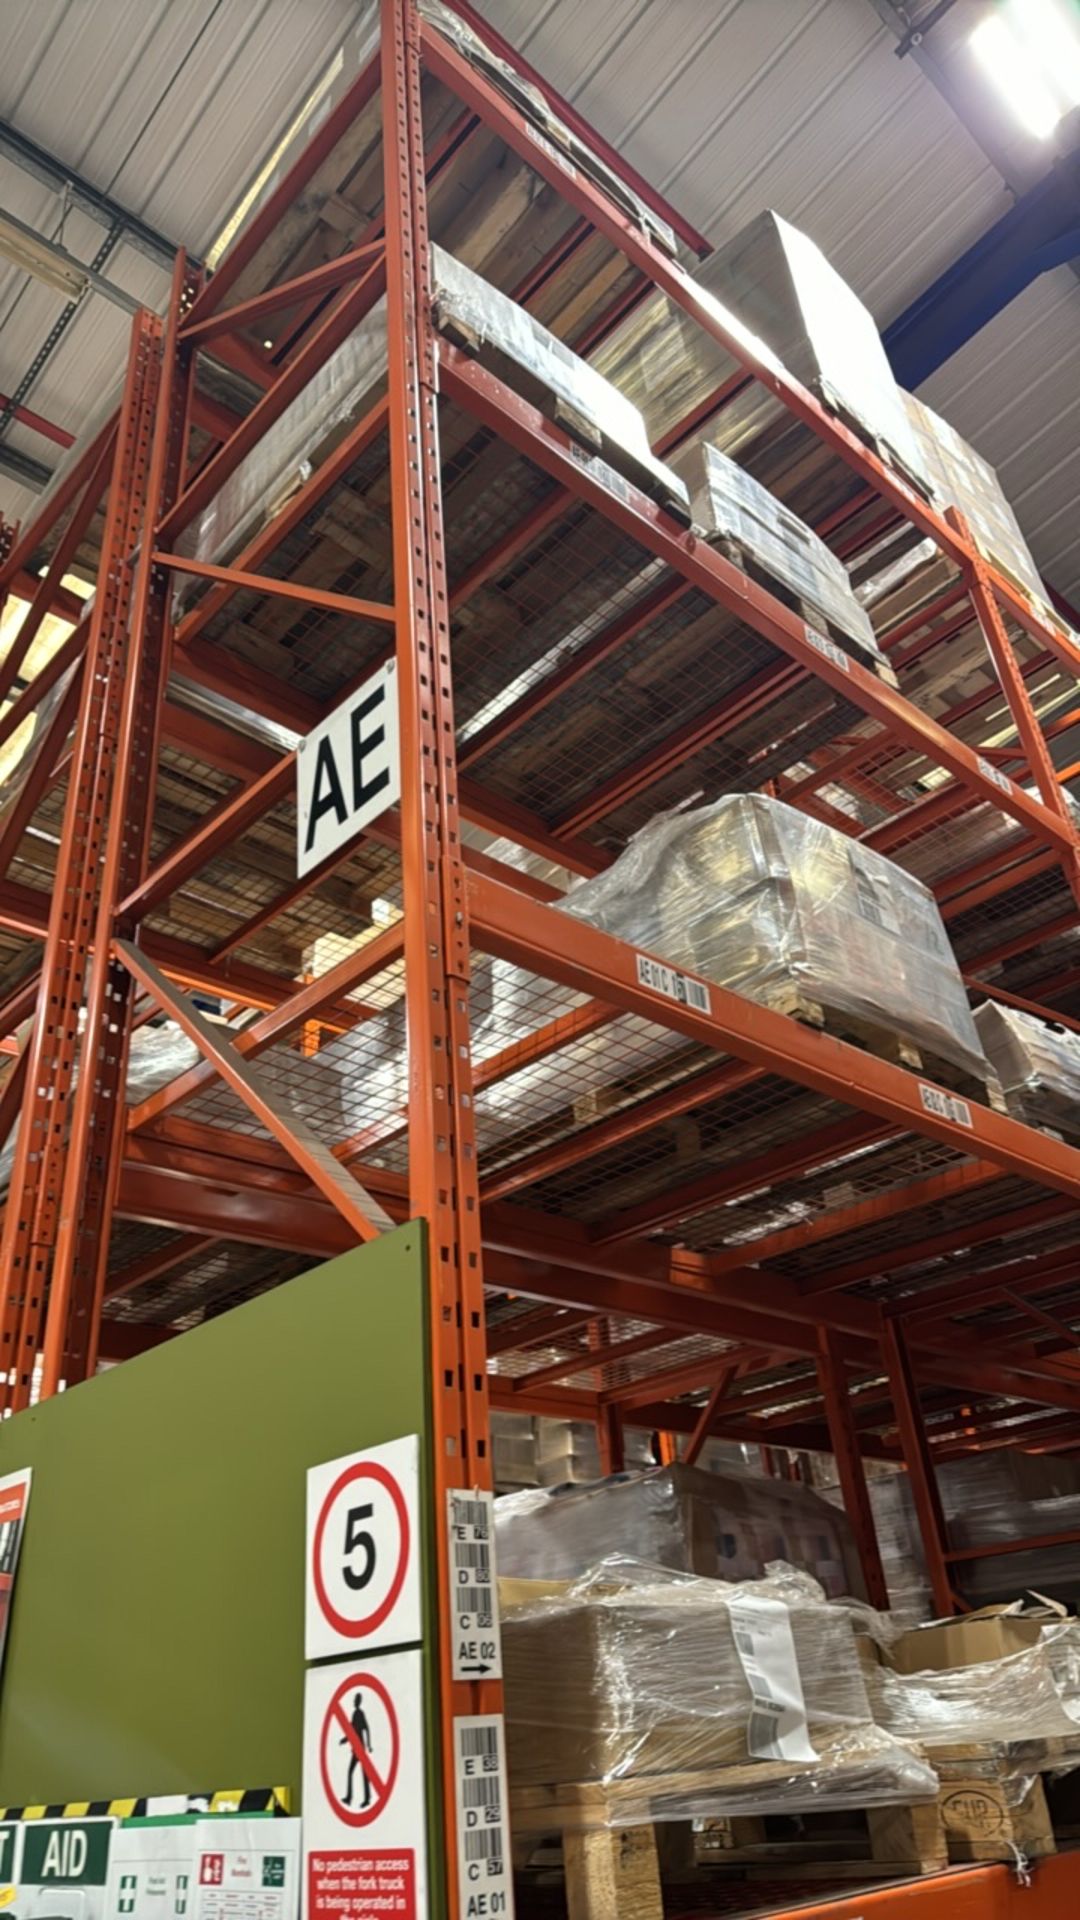 ref 5 - 23 Bays Of Boltless Pallet Racking - Image 2 of 9